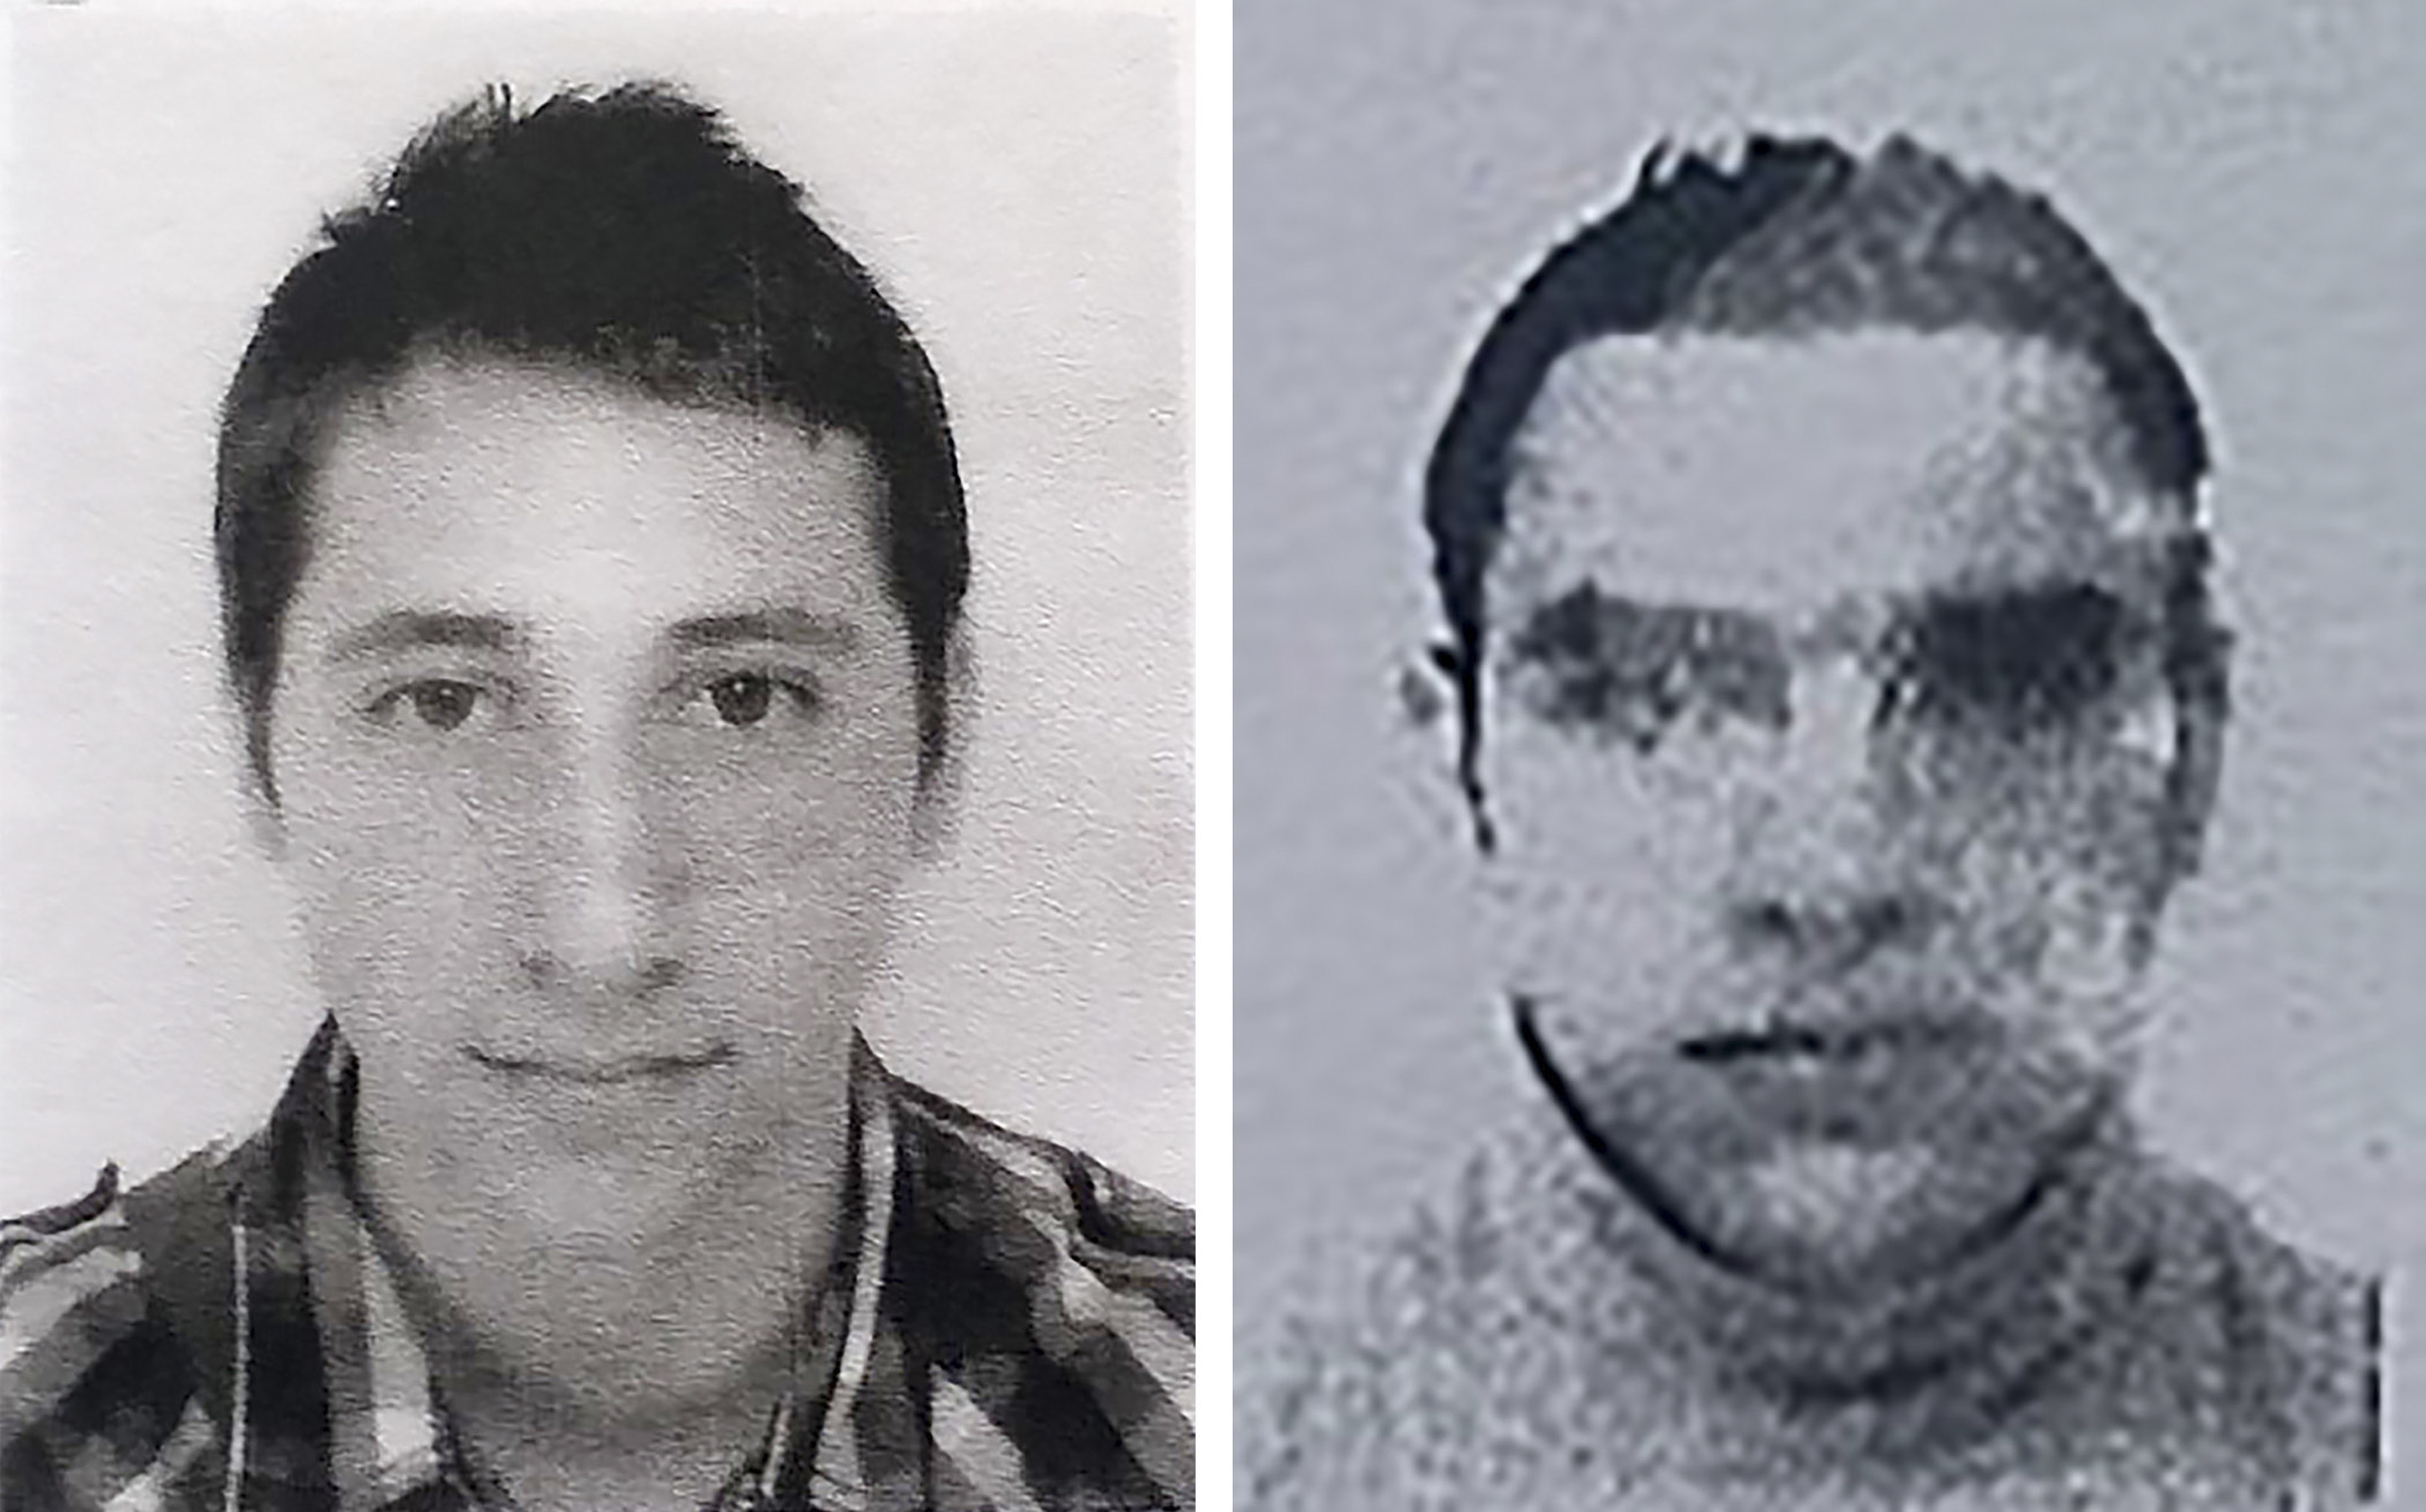 Left: Abdel Malik Petitjean, 19, one the two men who stormed into a church on July 26 in the northern French town of Saint-Etienne-du-Rouvray during morning mass and cut the throat of a 86-year-old priest at the altar. Right: A reproduction of the picture on the residence permit of Mohamed Lahouaiej-Bouhlel, the man who rammed his truck into a crowd celebrating Bastille Day in Nice on July 14. (Agence France-Presse—Getty Images)